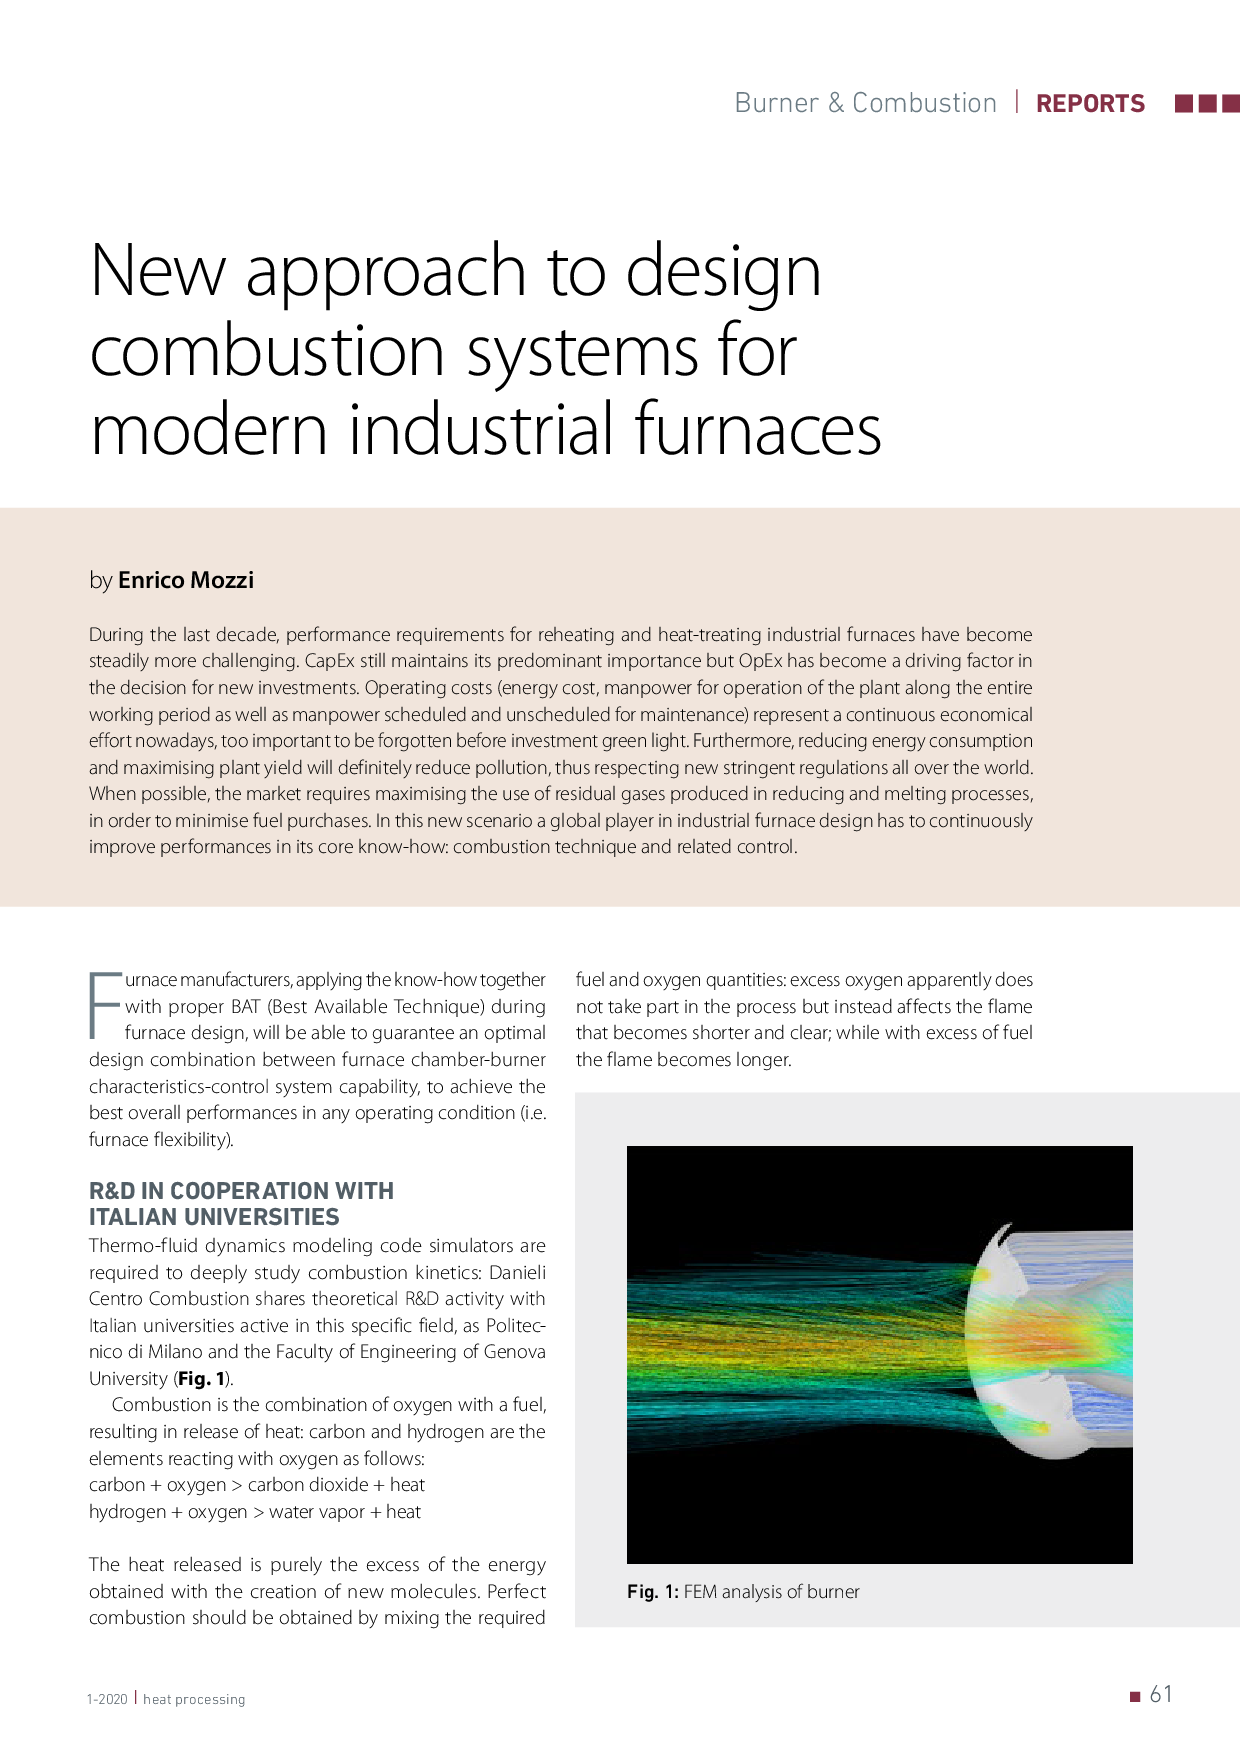 New approach to design combustion systems for modern industrial furnaces